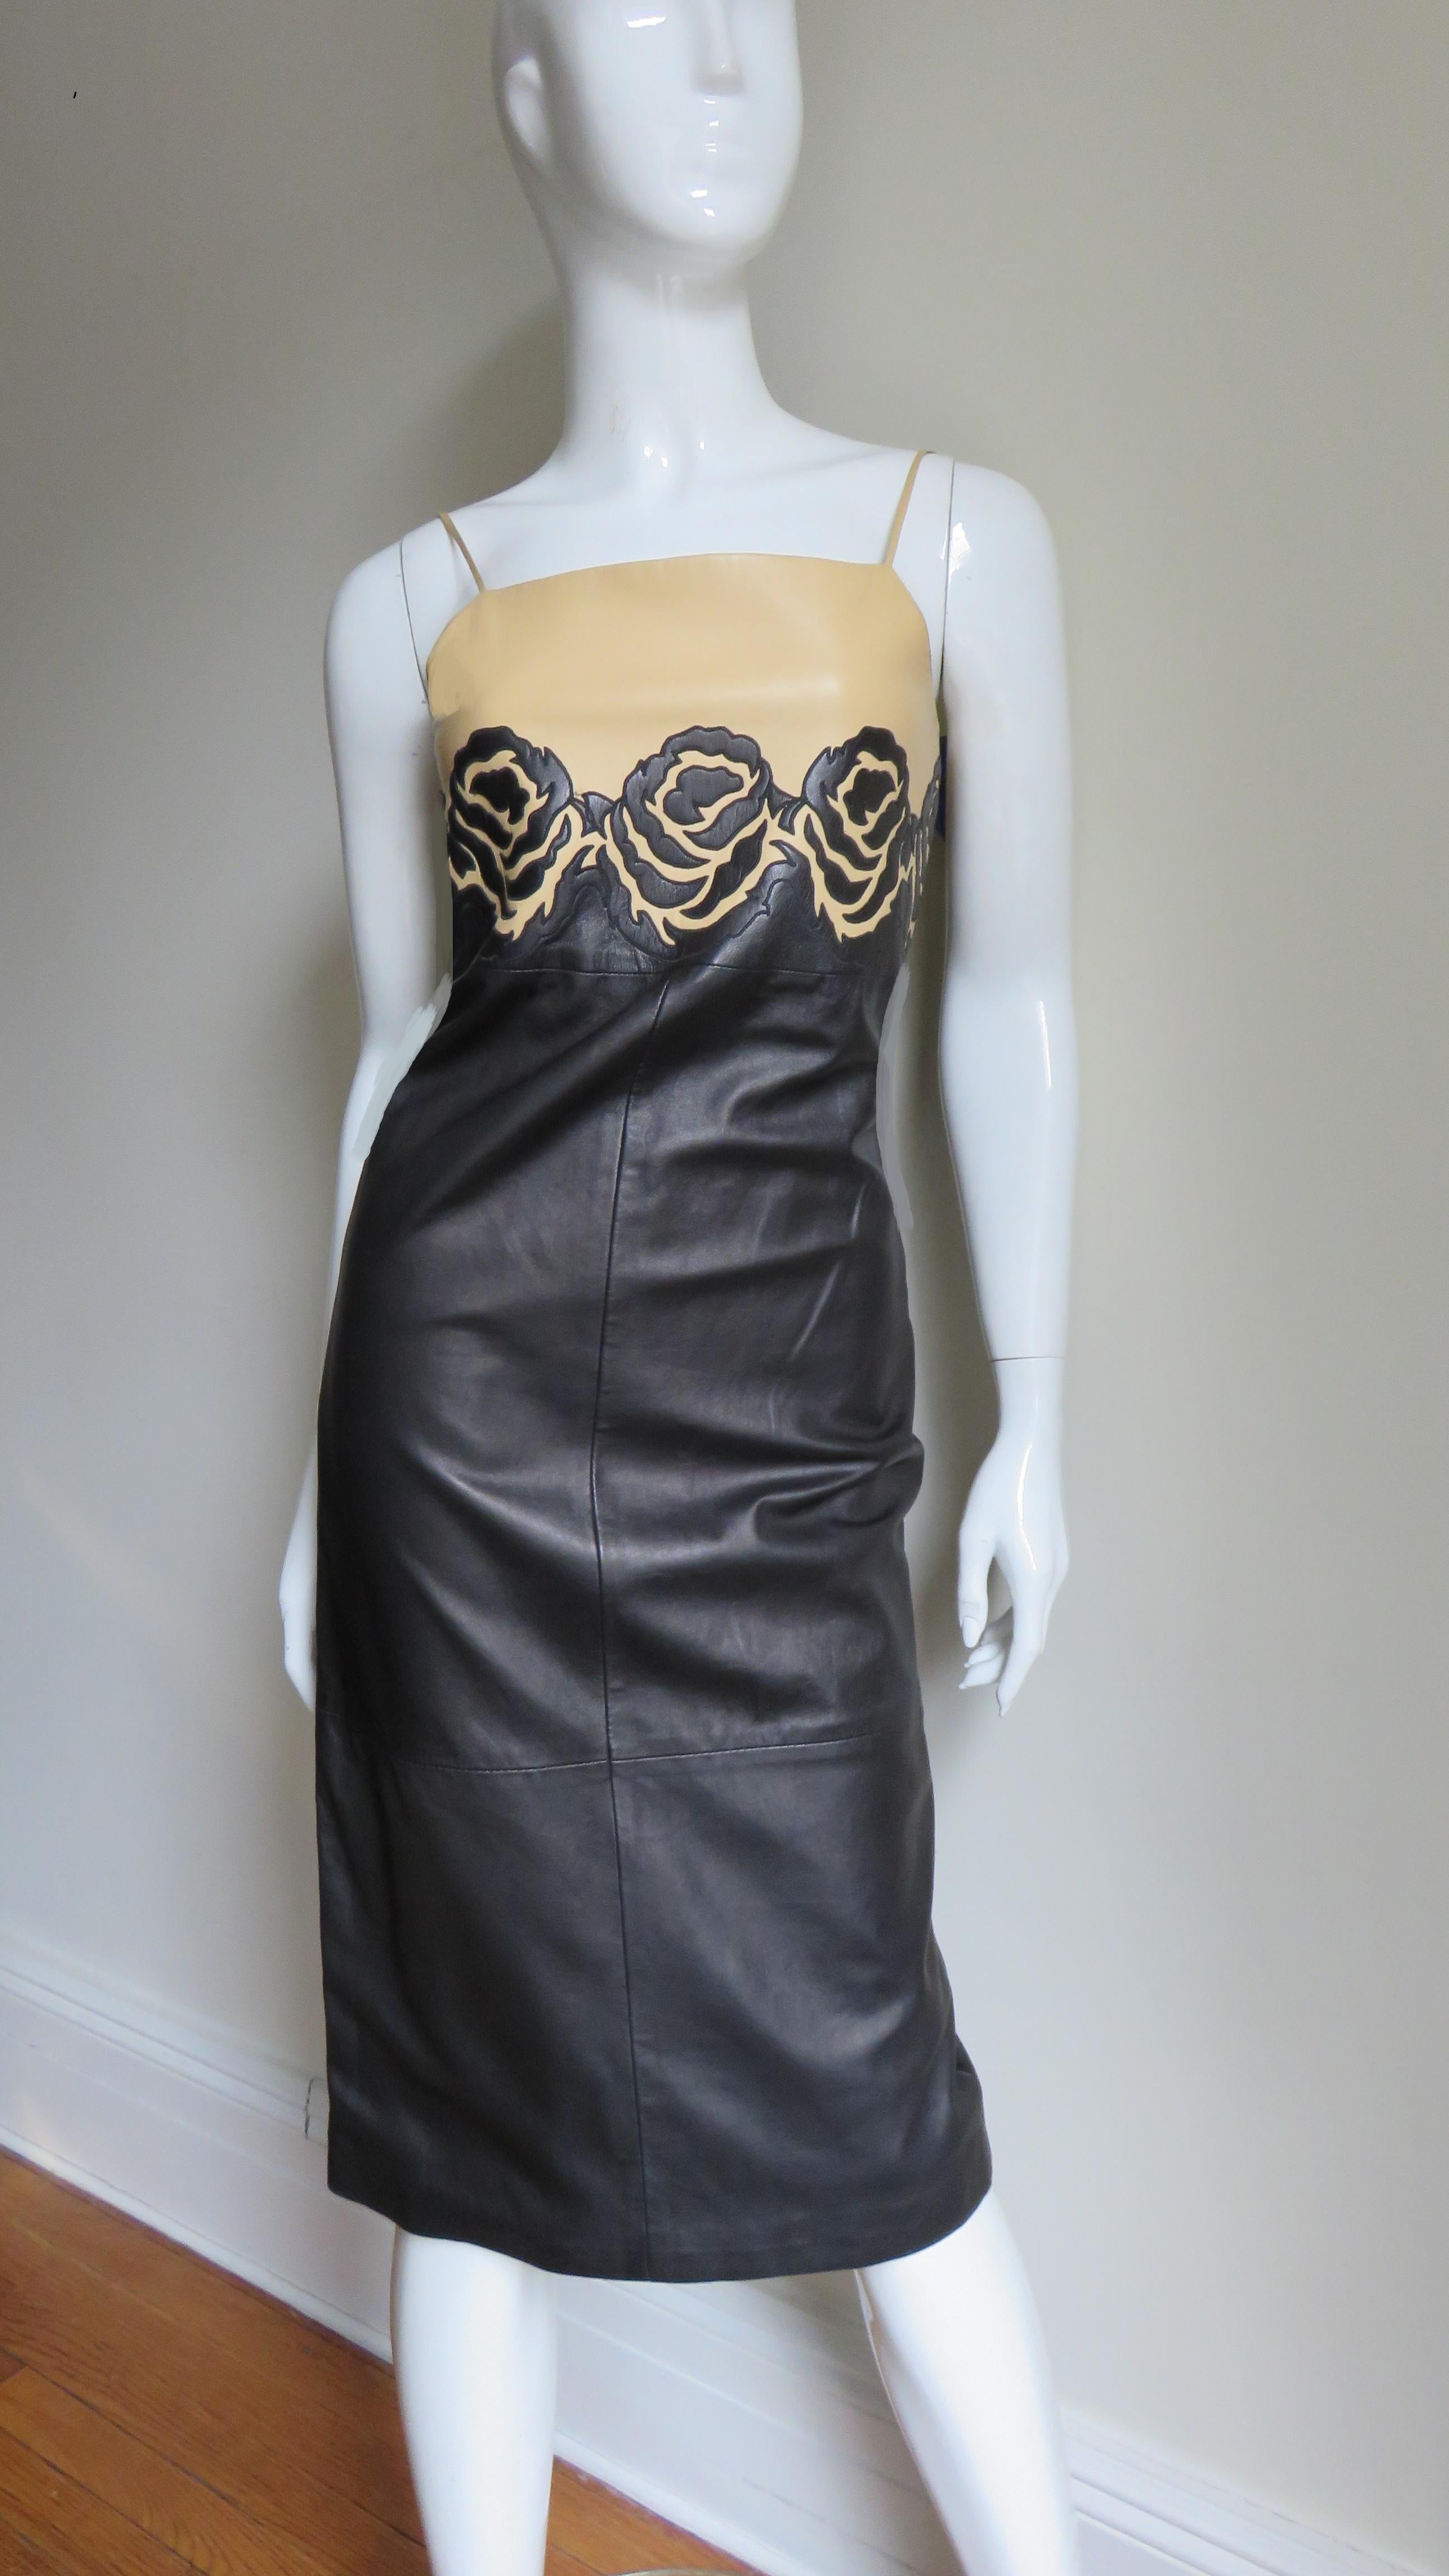  Gianni Versace Leather Color Block Dress with Applique Roses 1990s 1